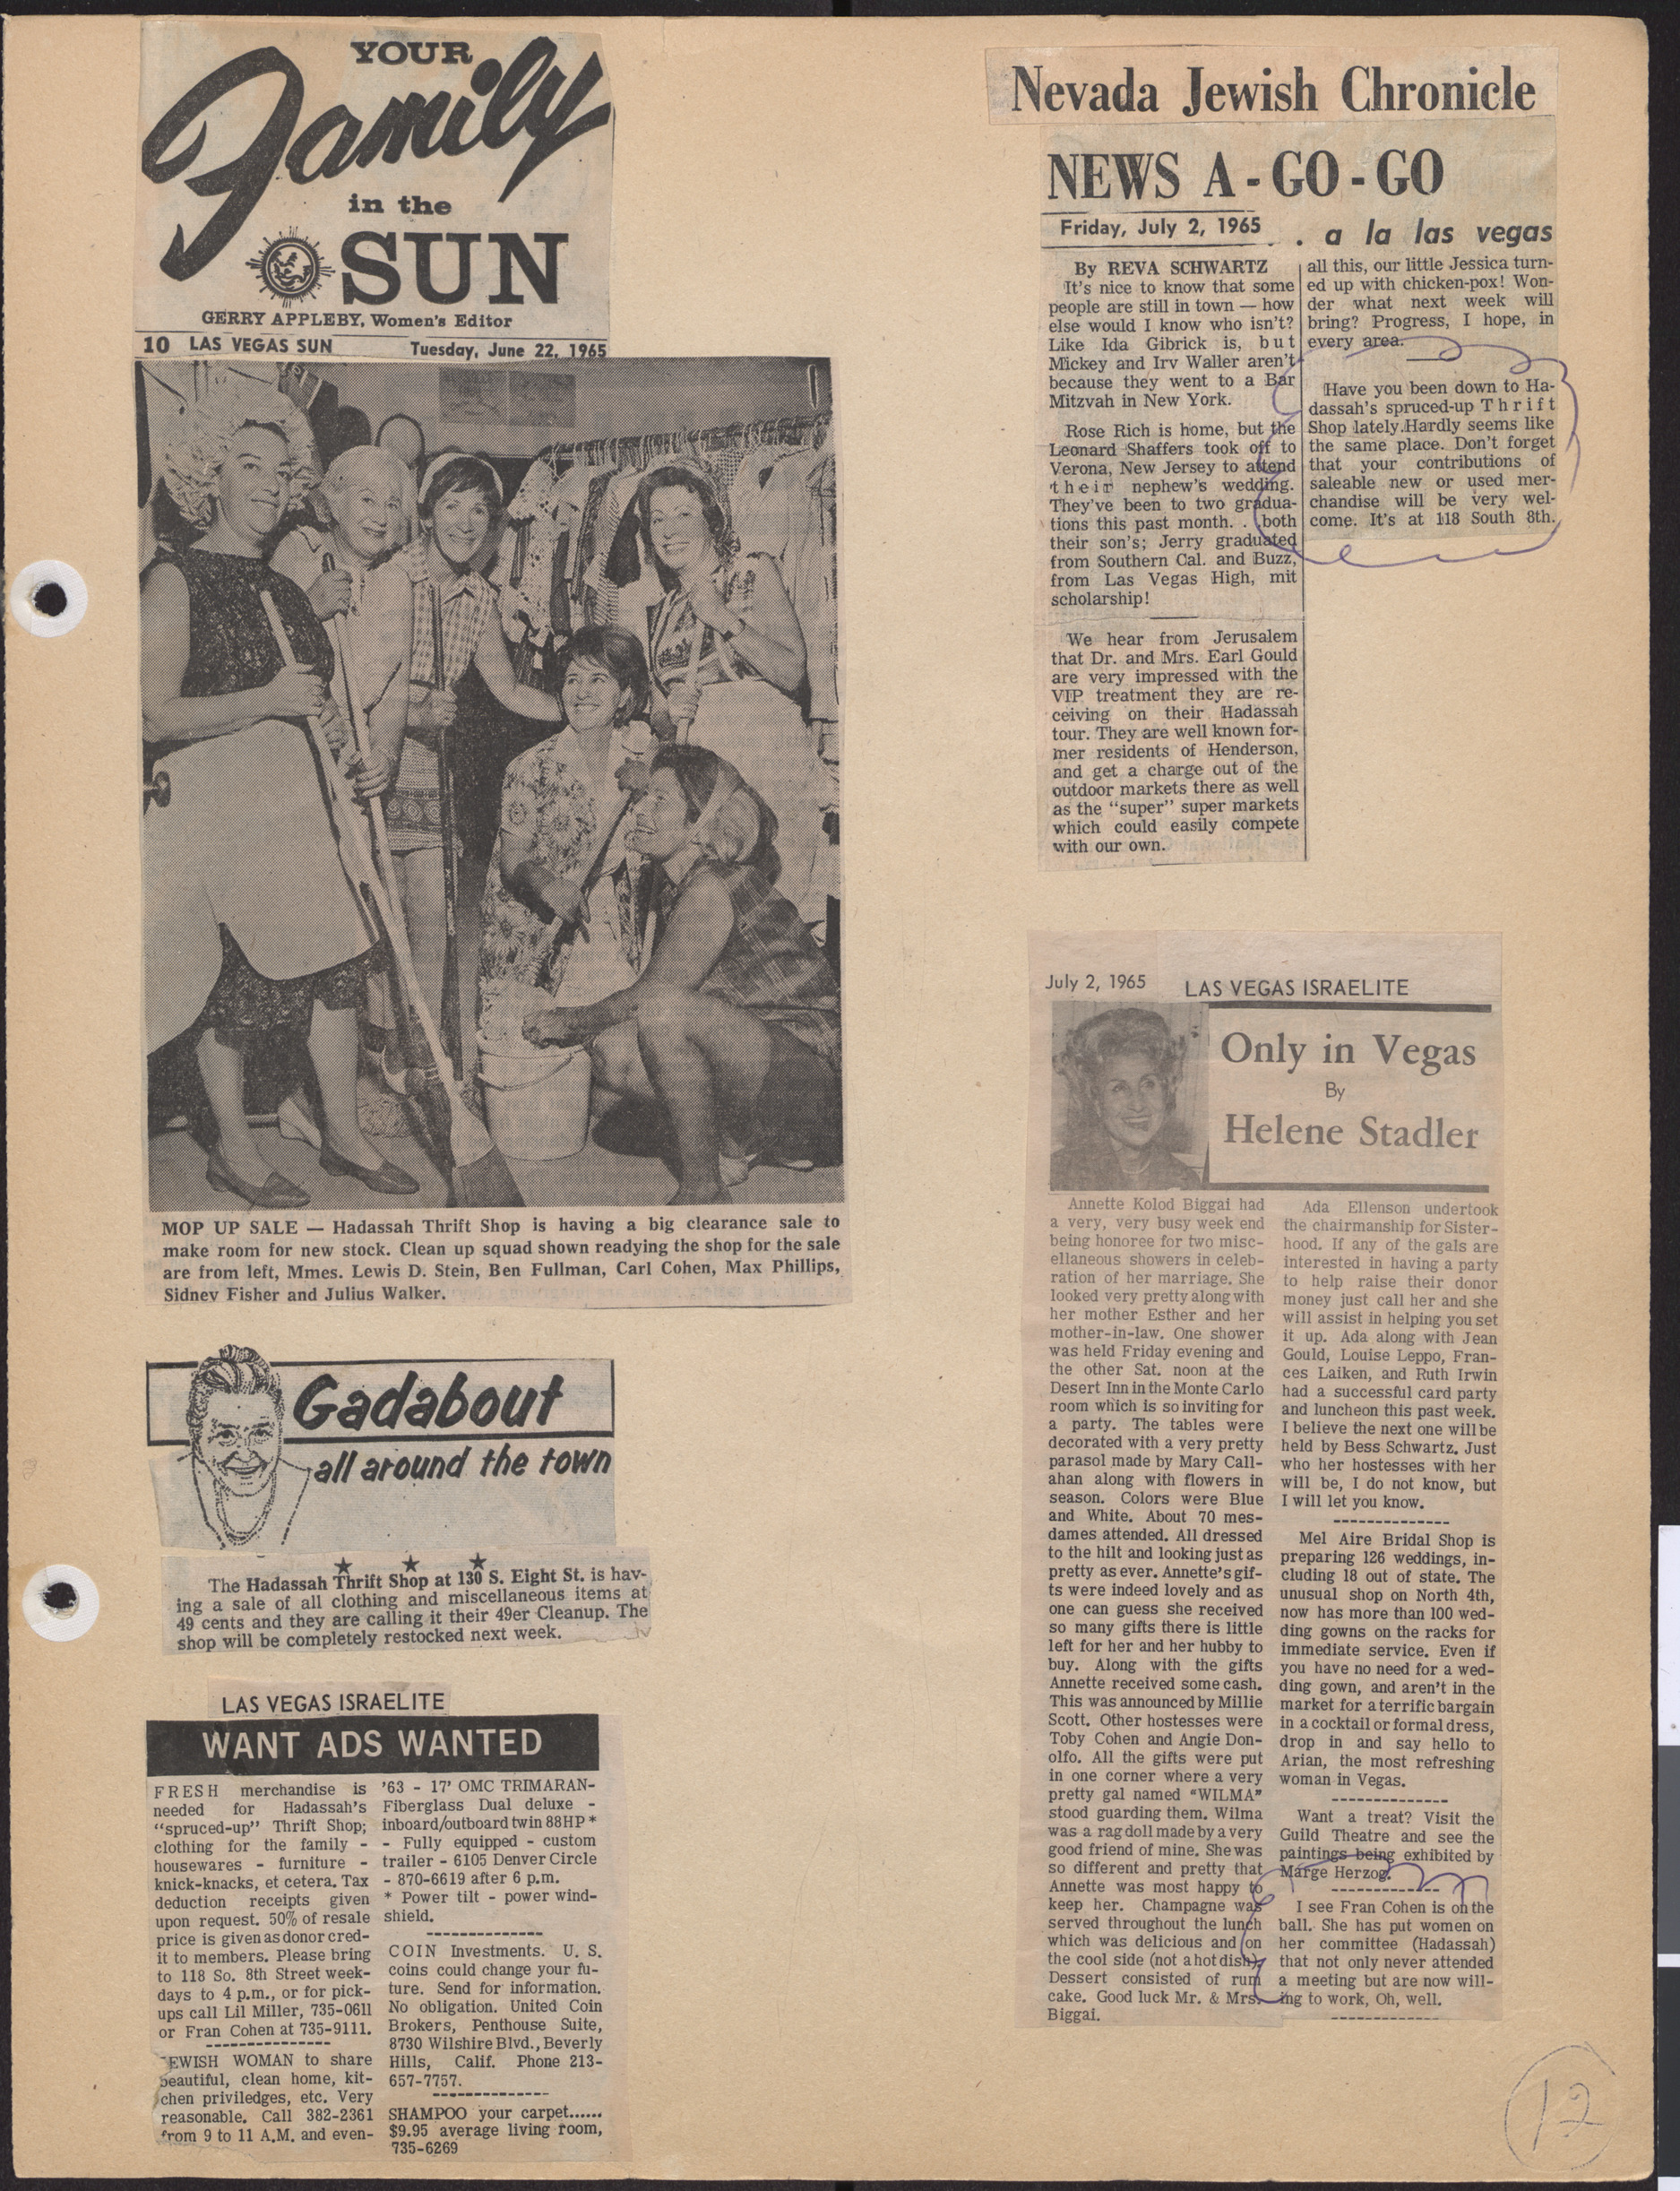 Newspaper clippings about the Hadassah Thrift Shop, 1965